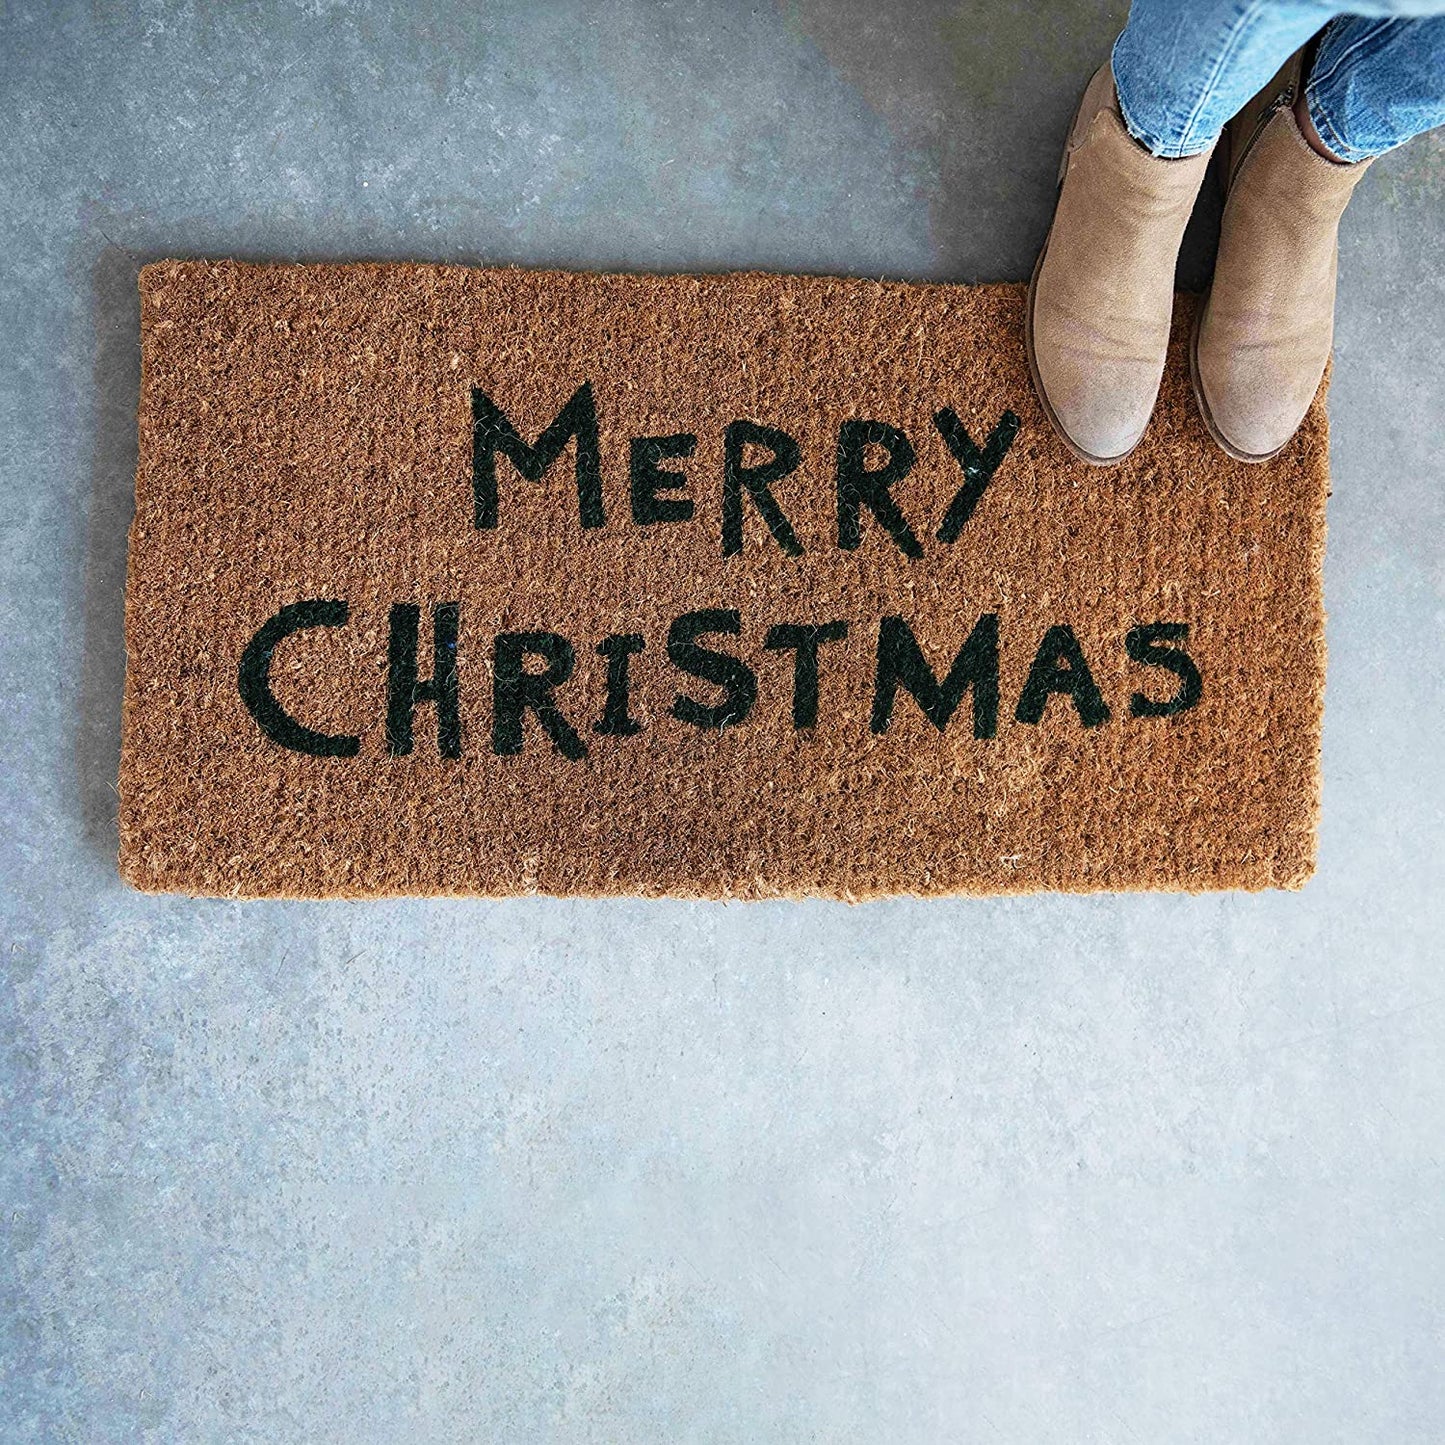 Merry Christmas Natural Holiday Coir Doormat - 32" L x 16" W - Mellow Monkey